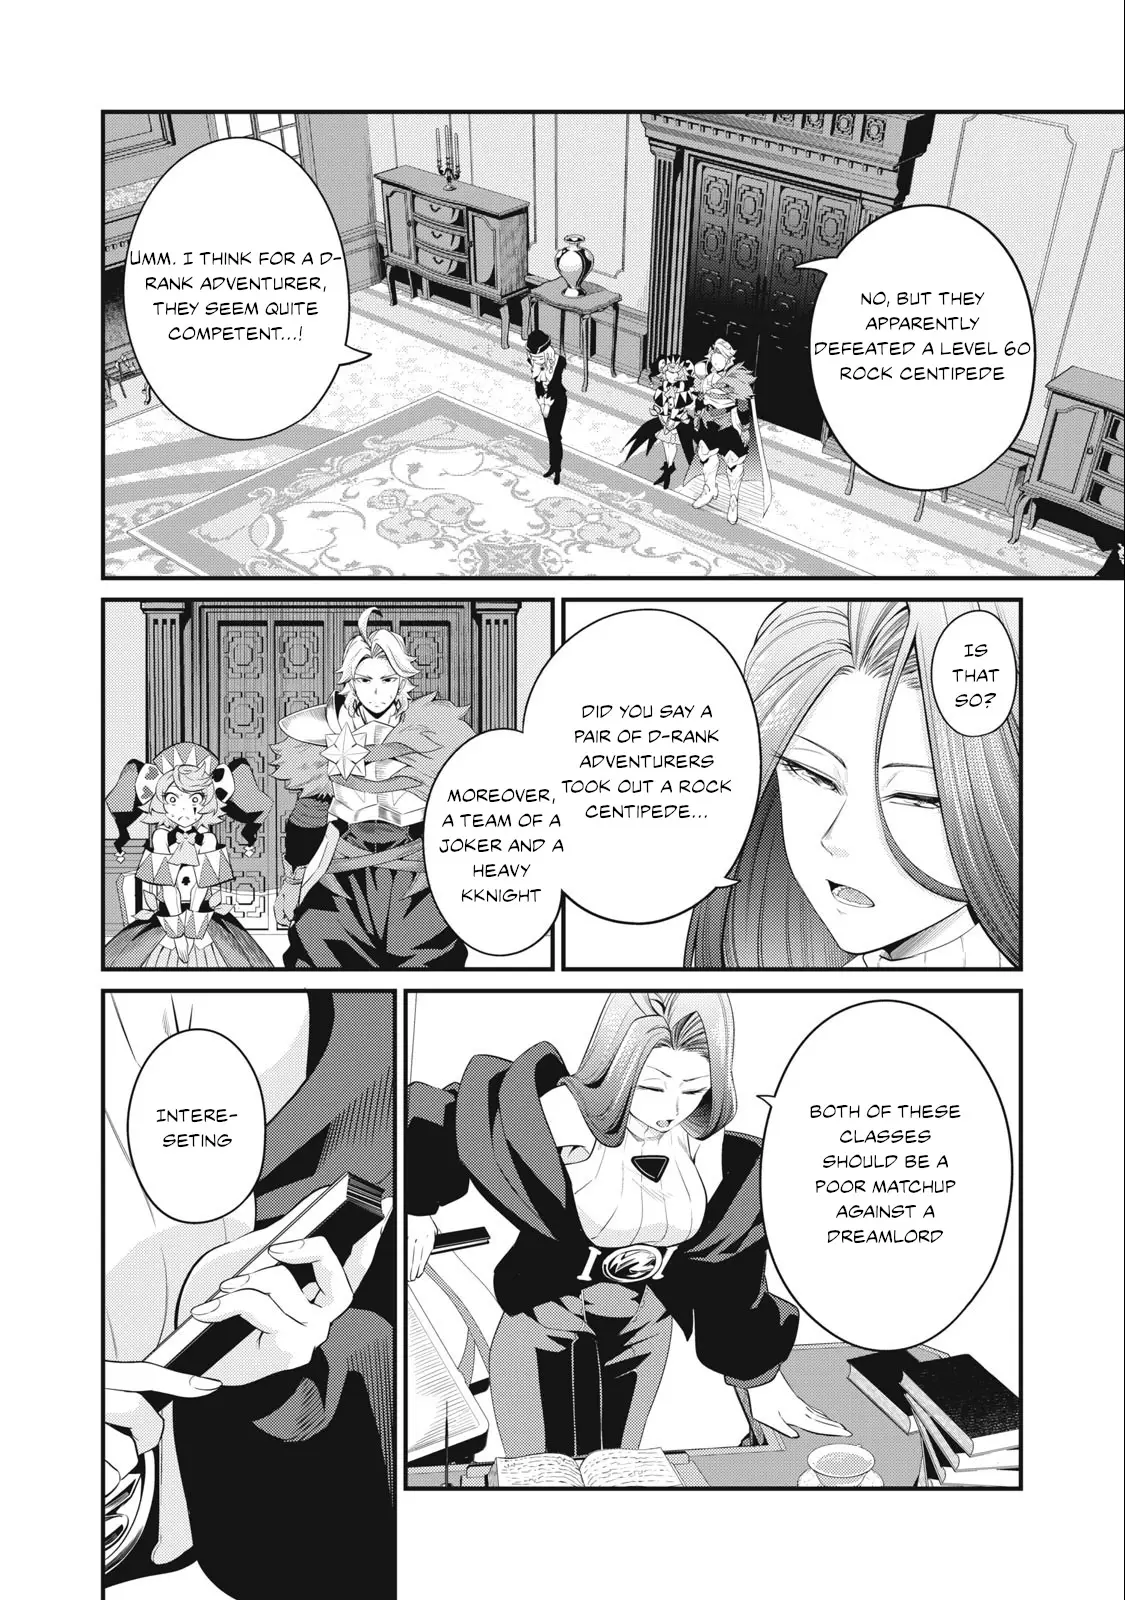 The Exiled Reincarnated Heavy Knight Is Unrivaled In Game Knowledge - 43 page 7-7fe6b69b